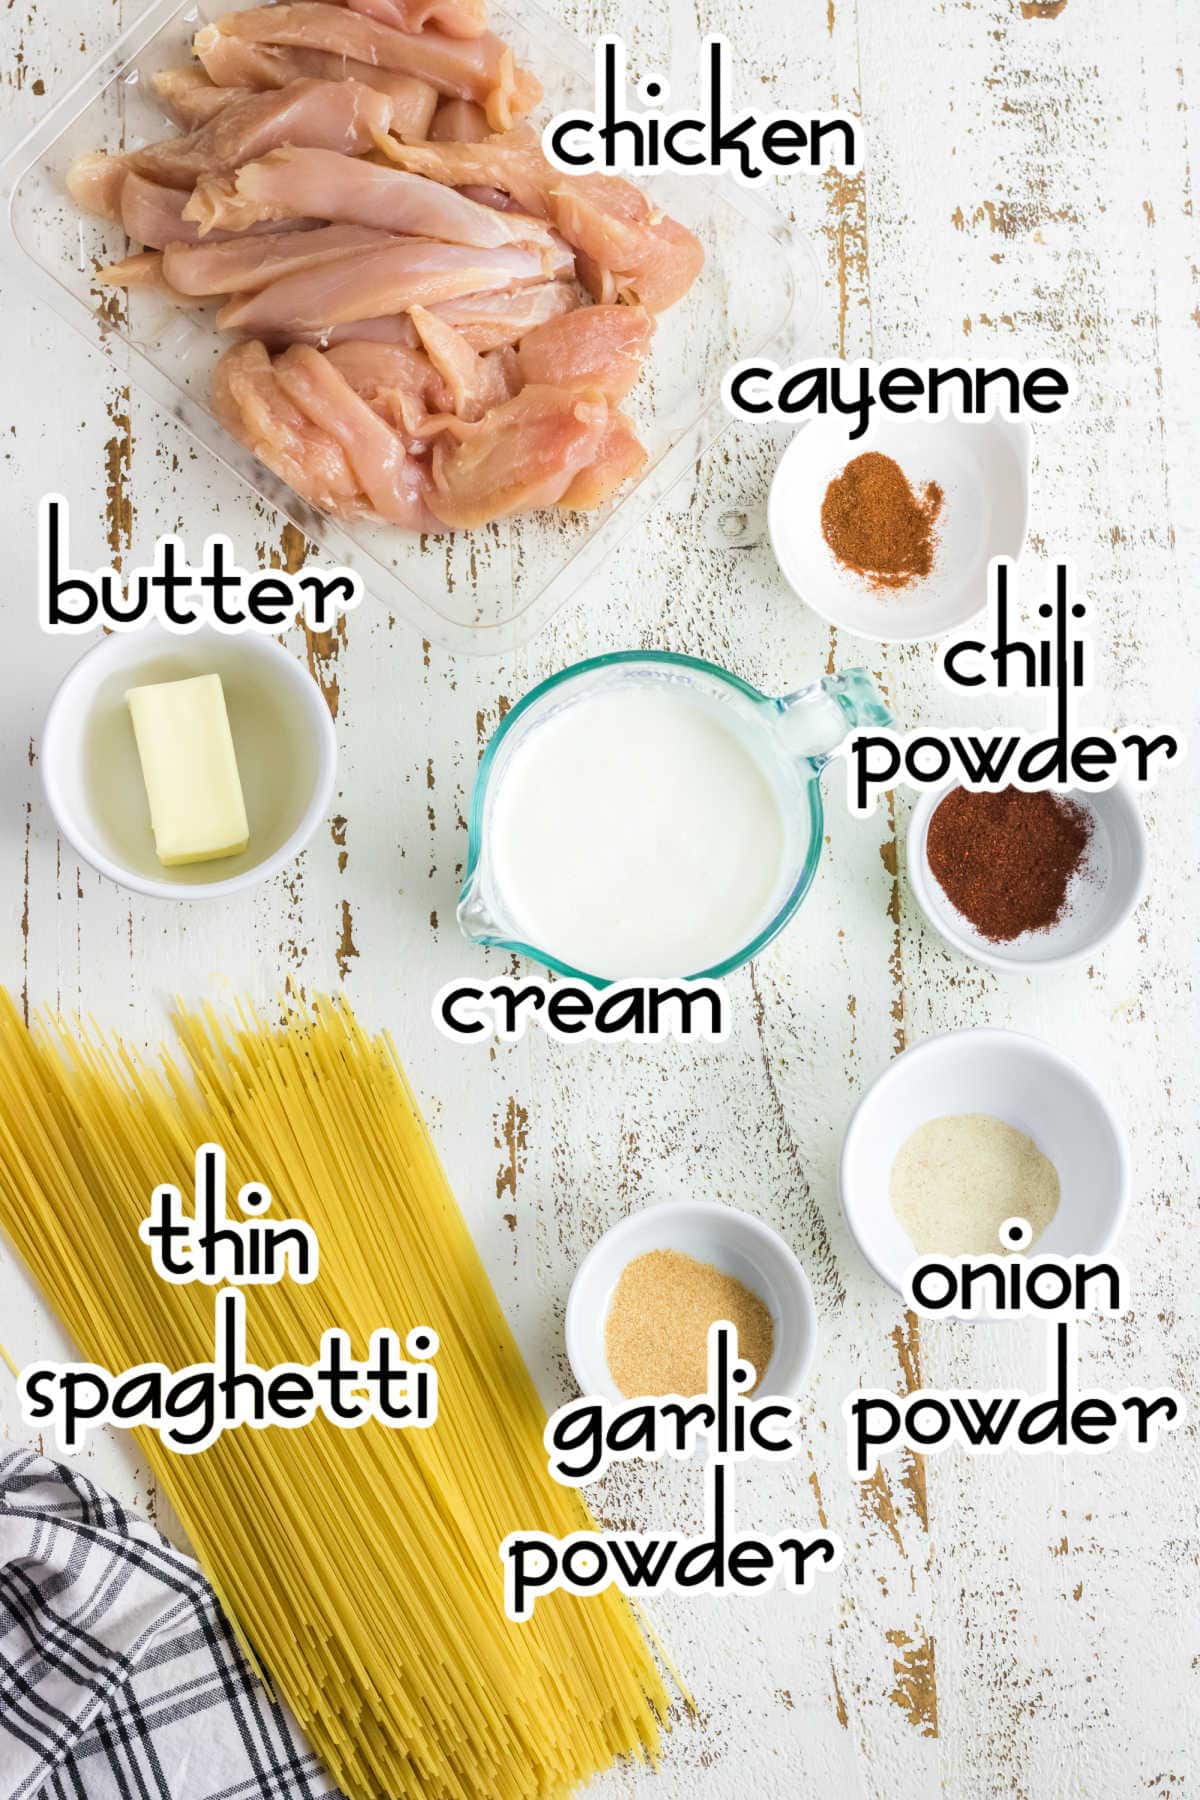 Labeled ingredients for Chicken Lazone.